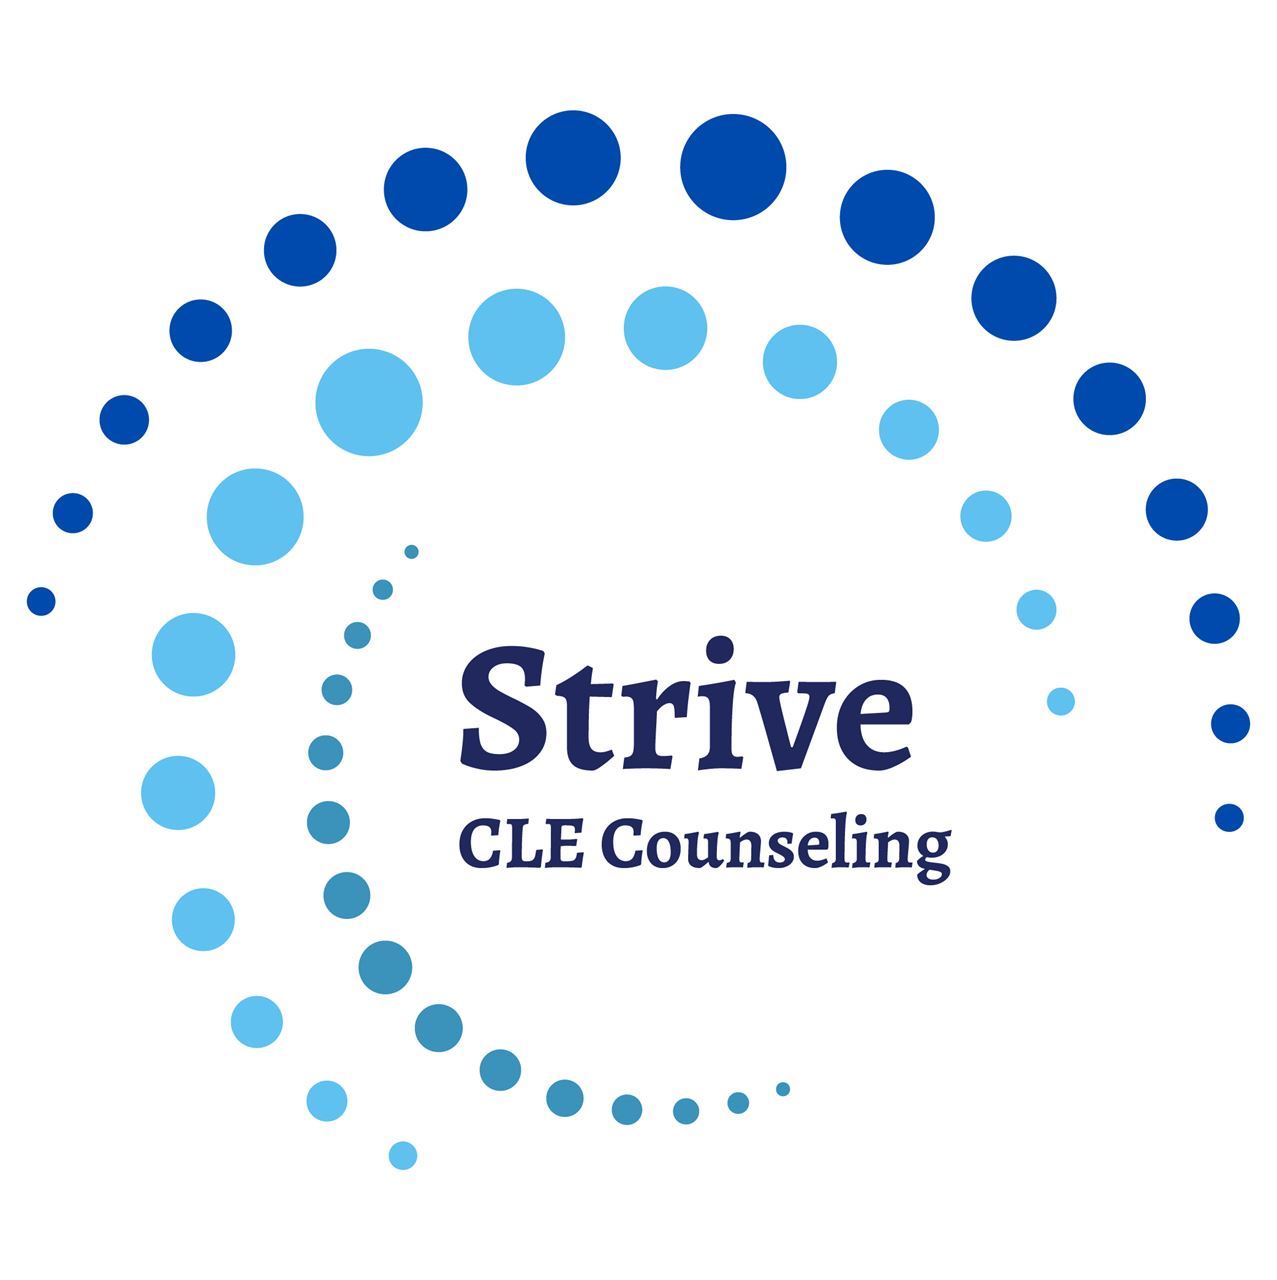 Strive CLE Counseling logo